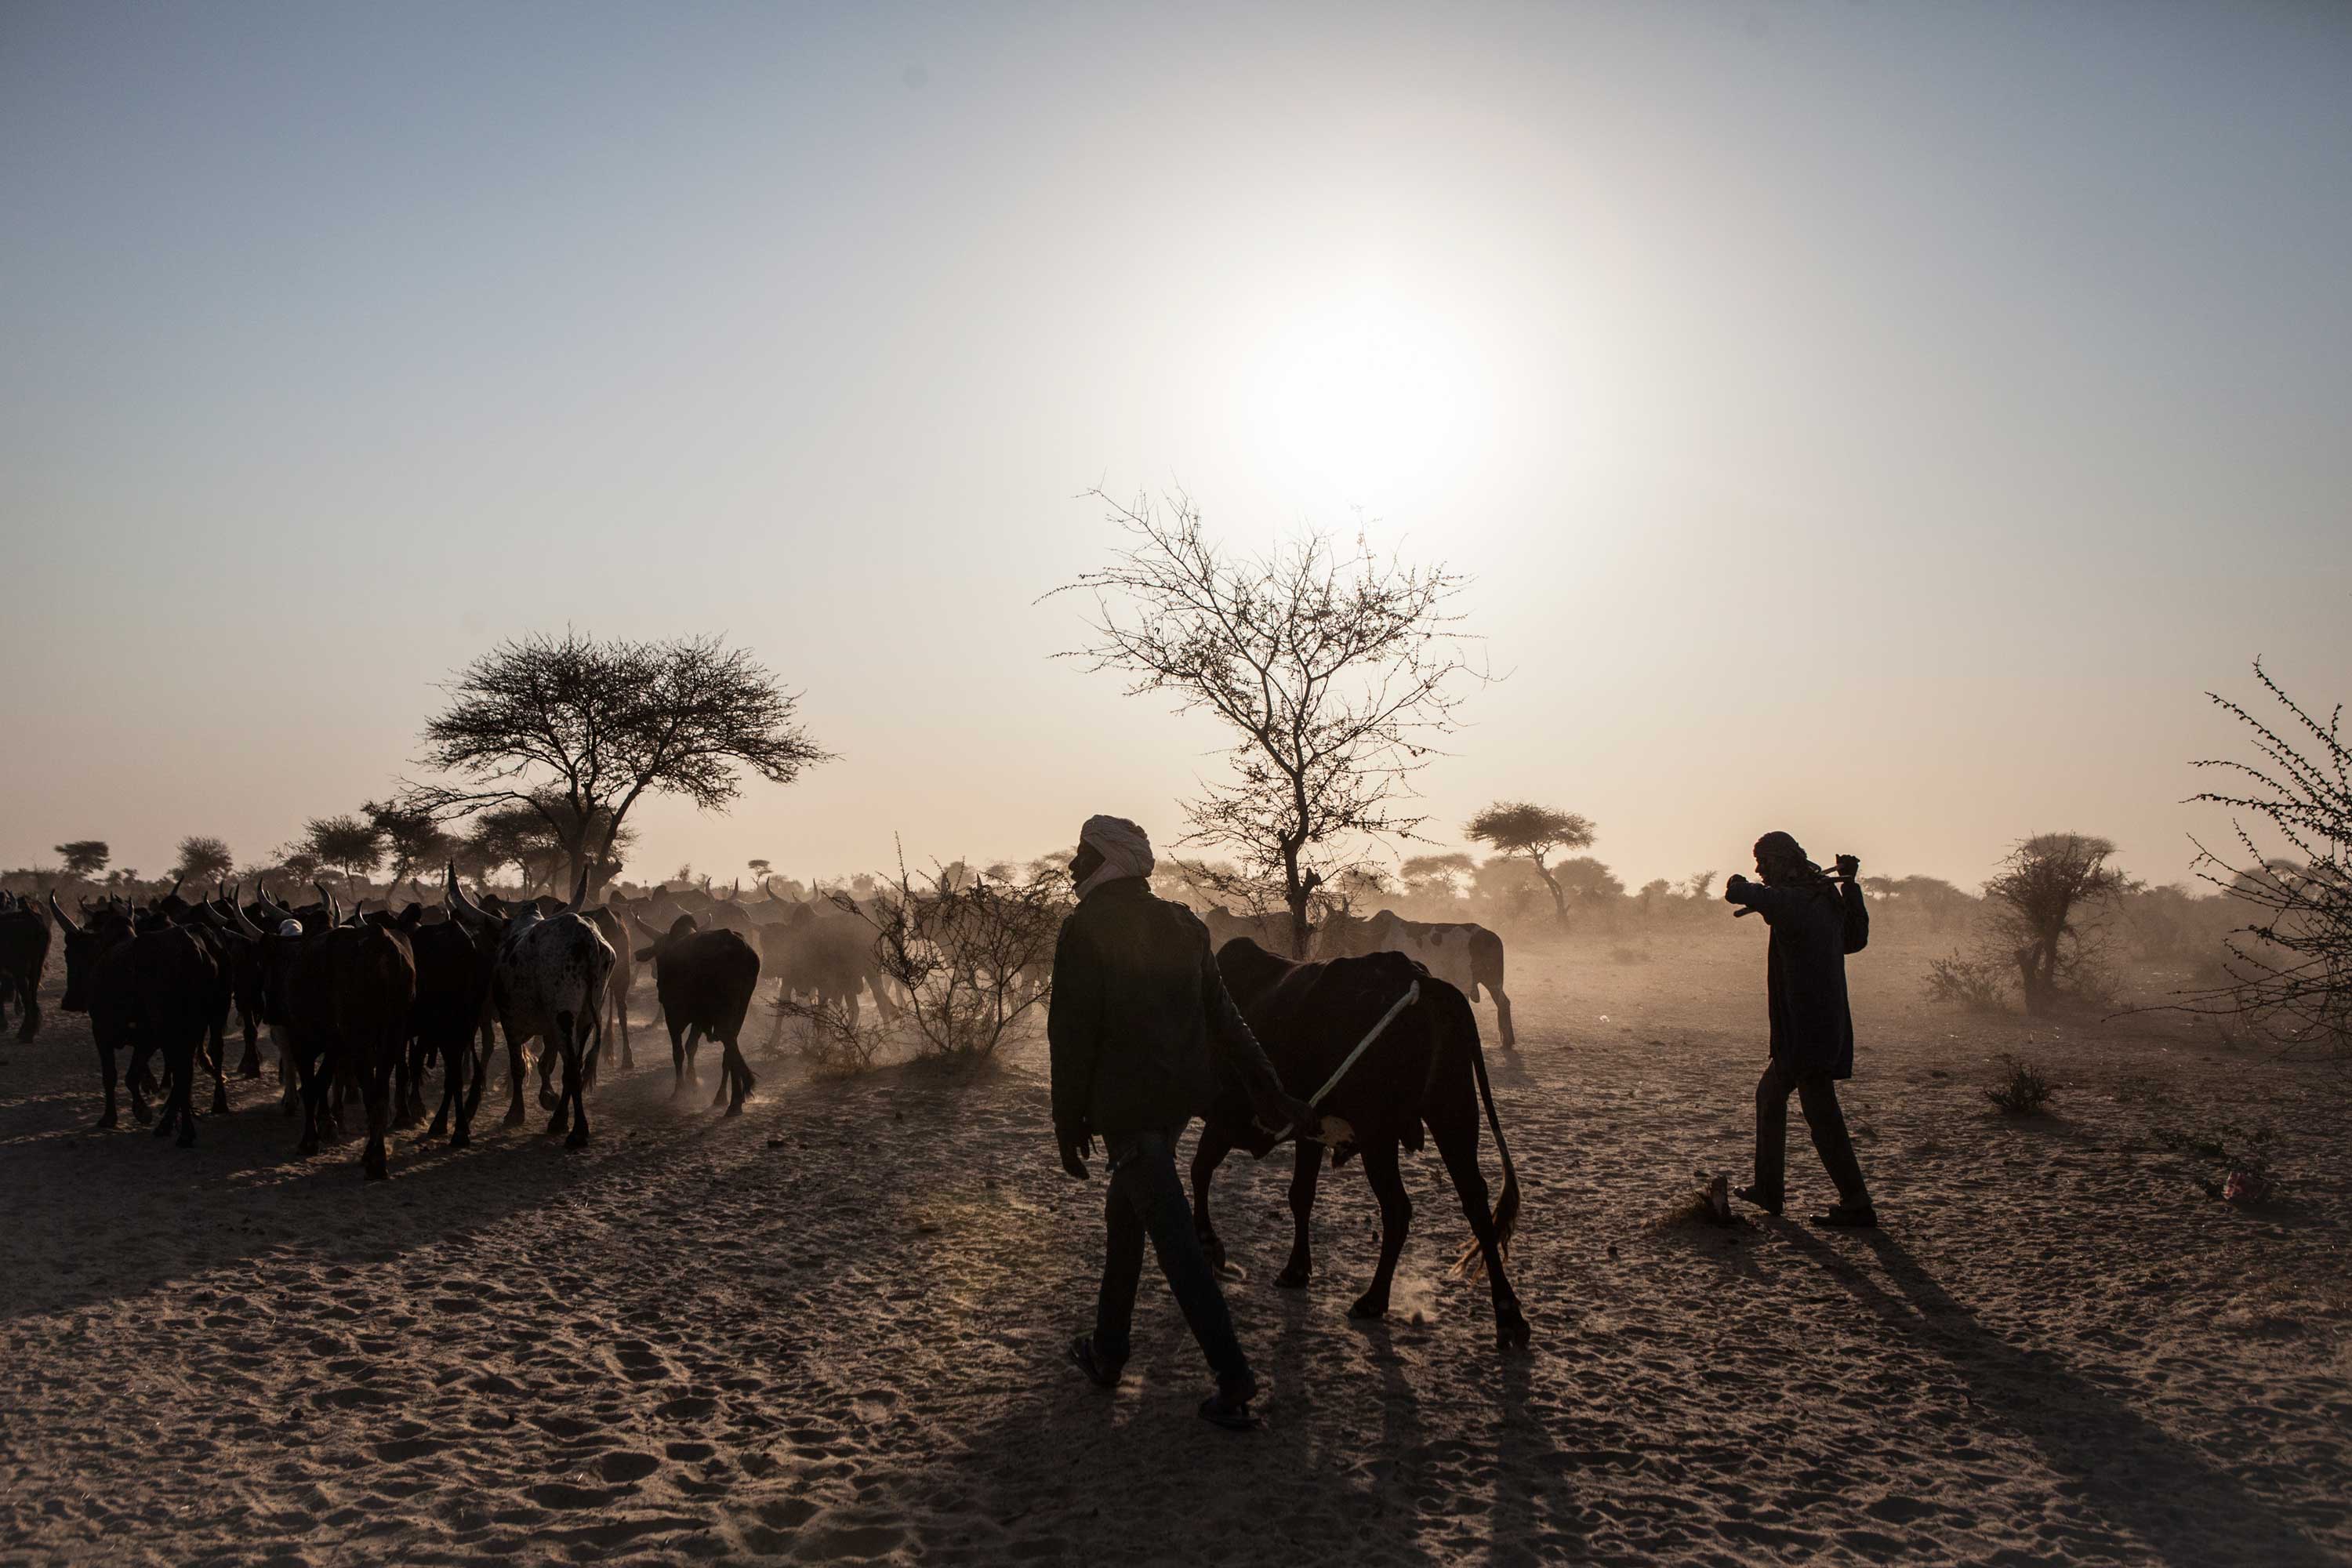 Herders lead their cows from N'djamena, Chad across Niger to be sold on the market in Northern Nigeria.